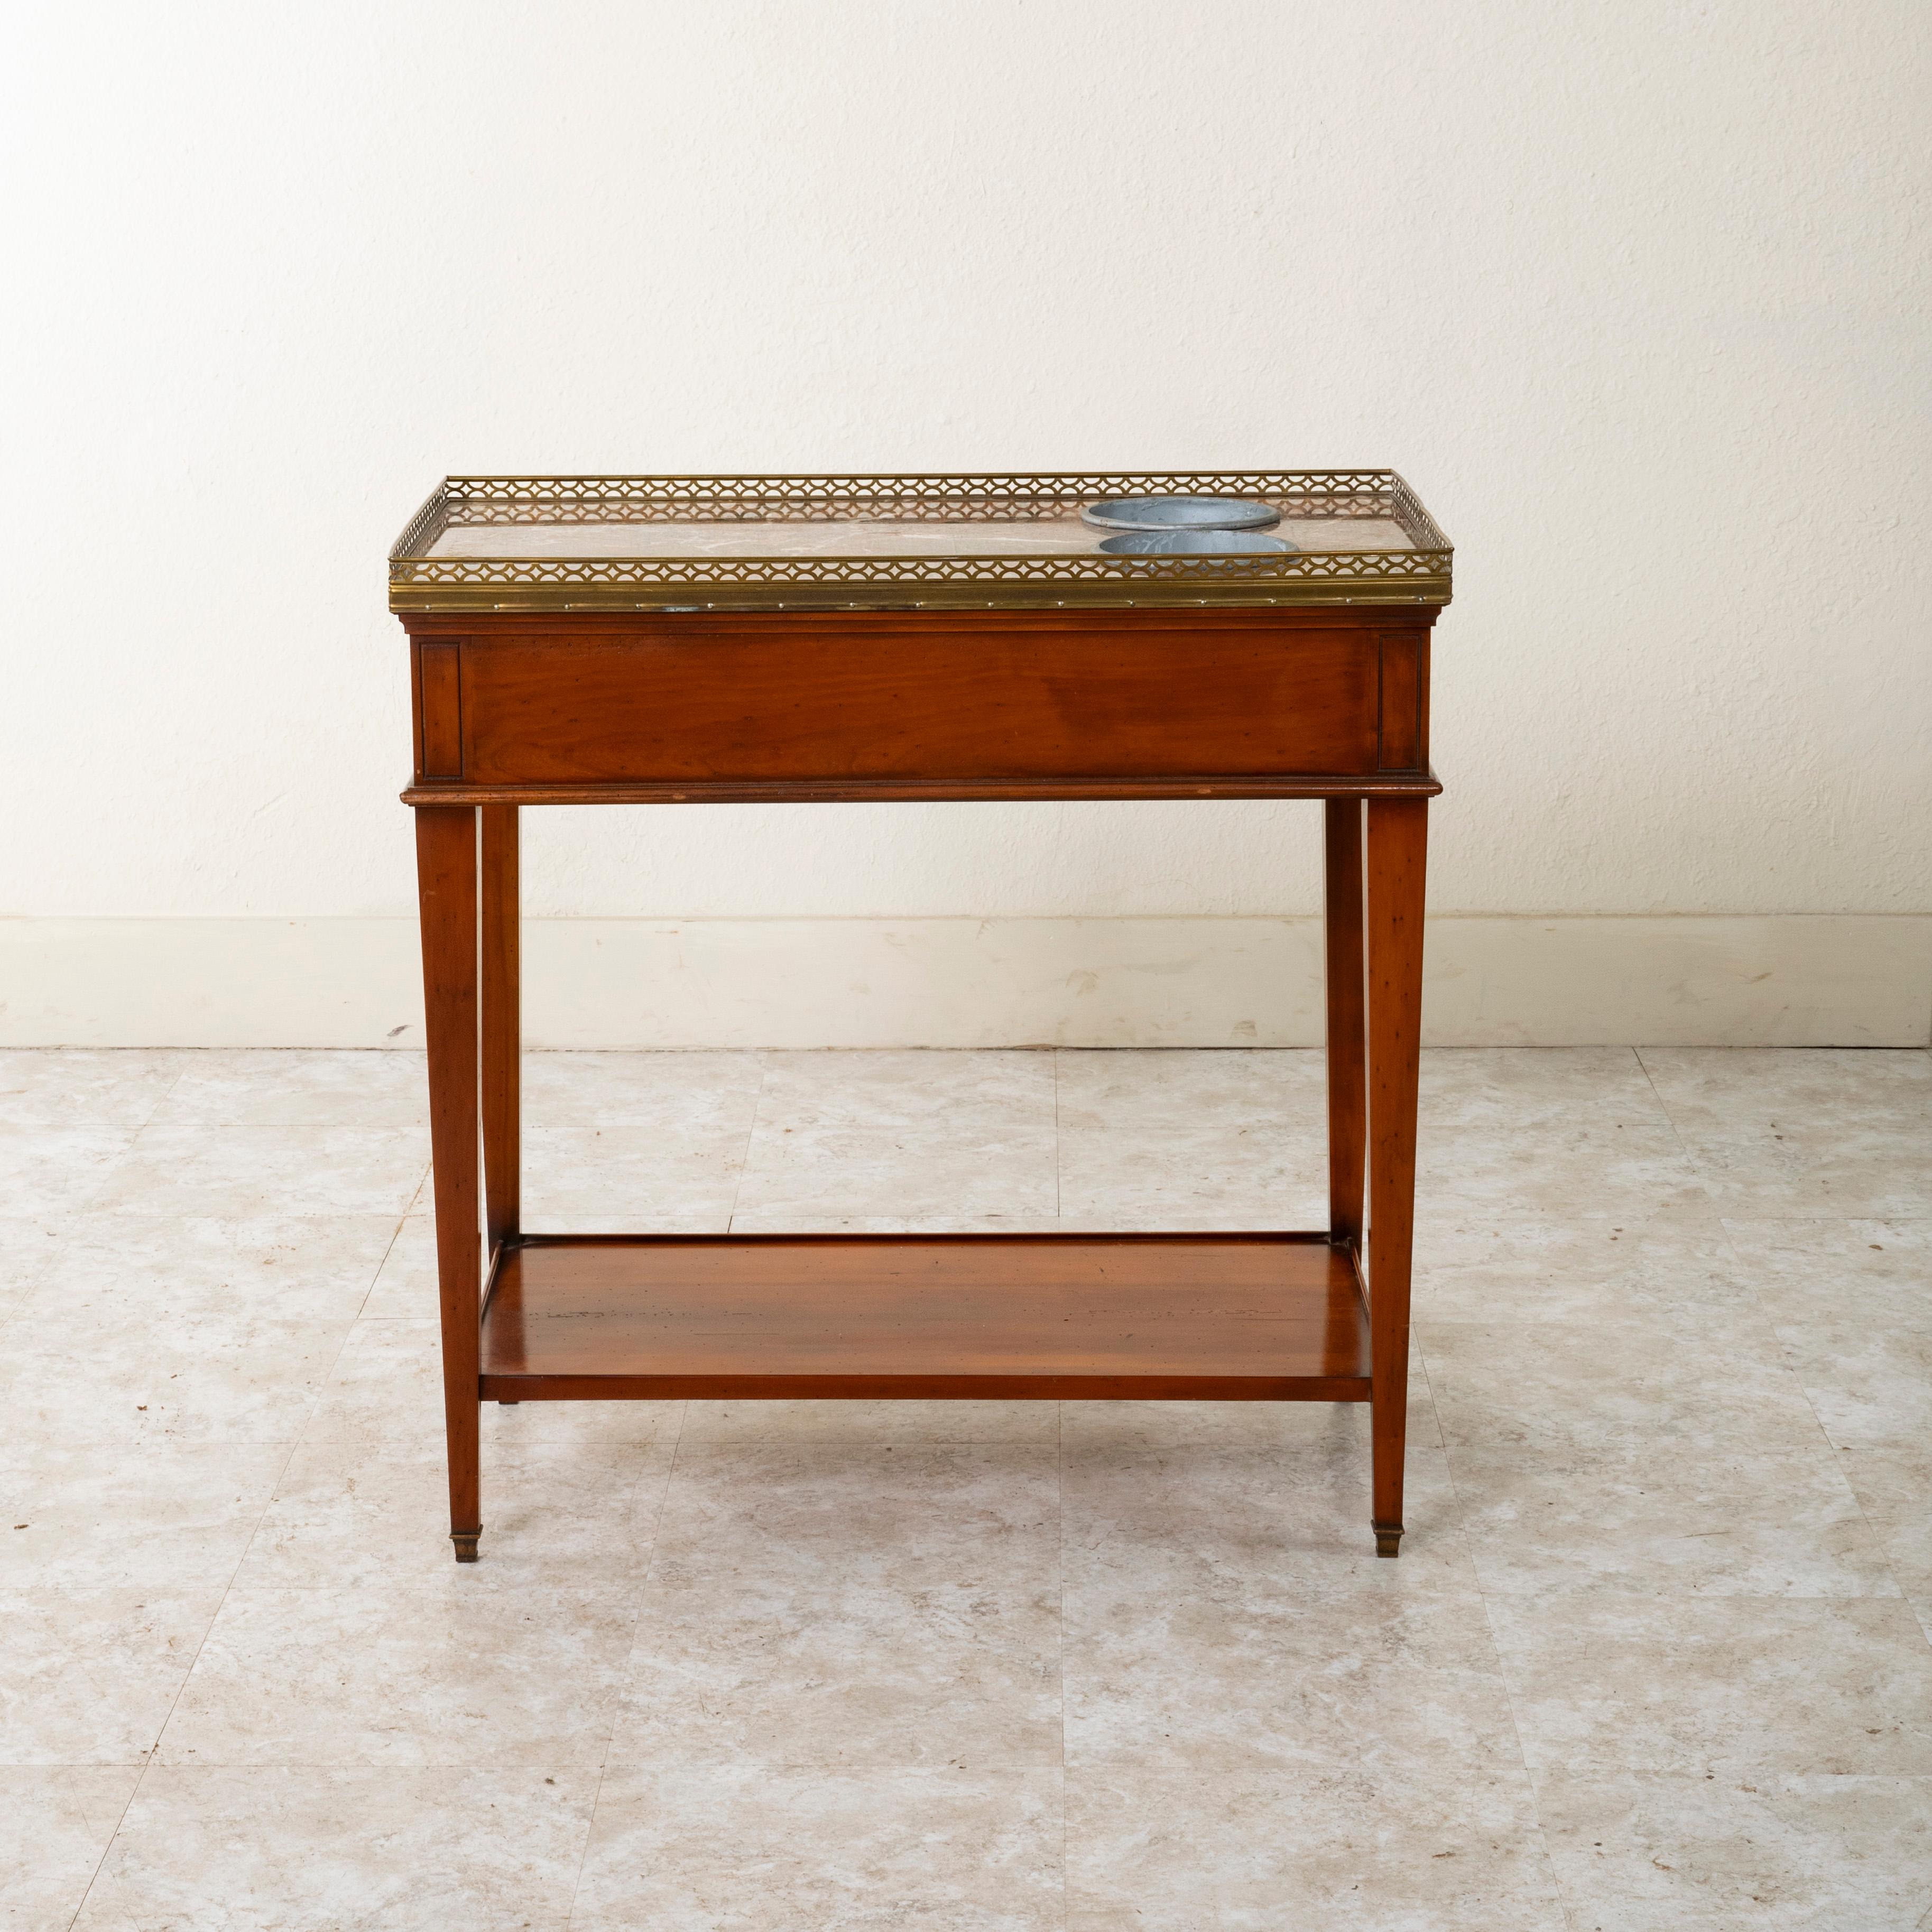 This mid twentieth century Louis XVI style walnut side table features a marble top surrounded by a bronze gallery. Two removable zinc buckets that rest in the marble top serve to chill wine or champagne. A lower shelf and single dovetailed drawer